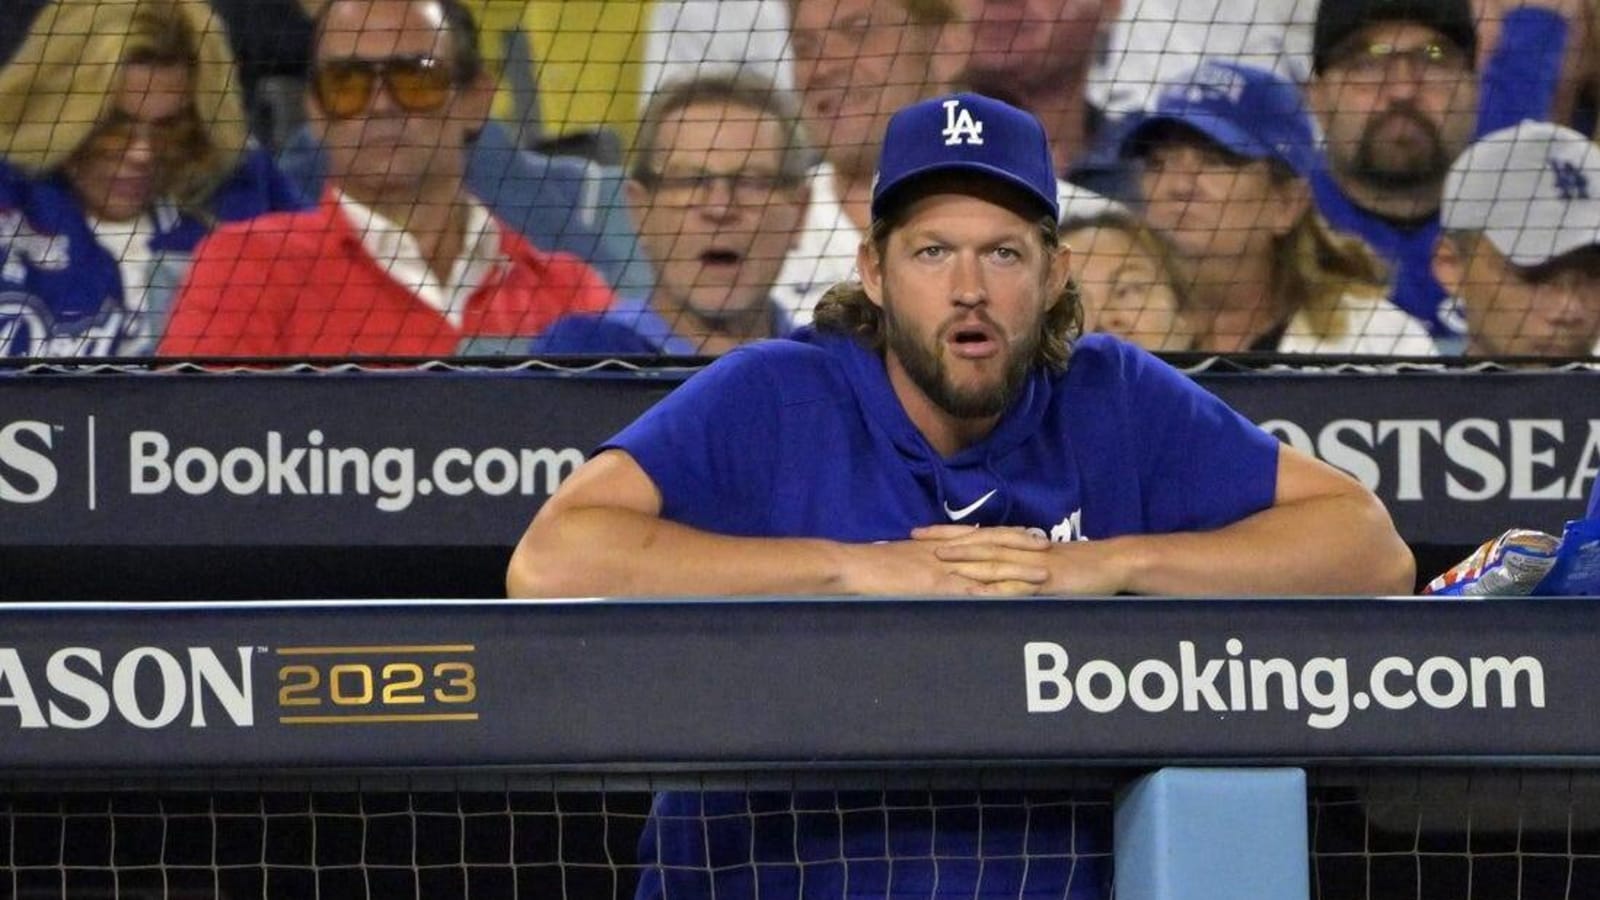 Clayton Kershaw takes next step in recovery with bullpen session